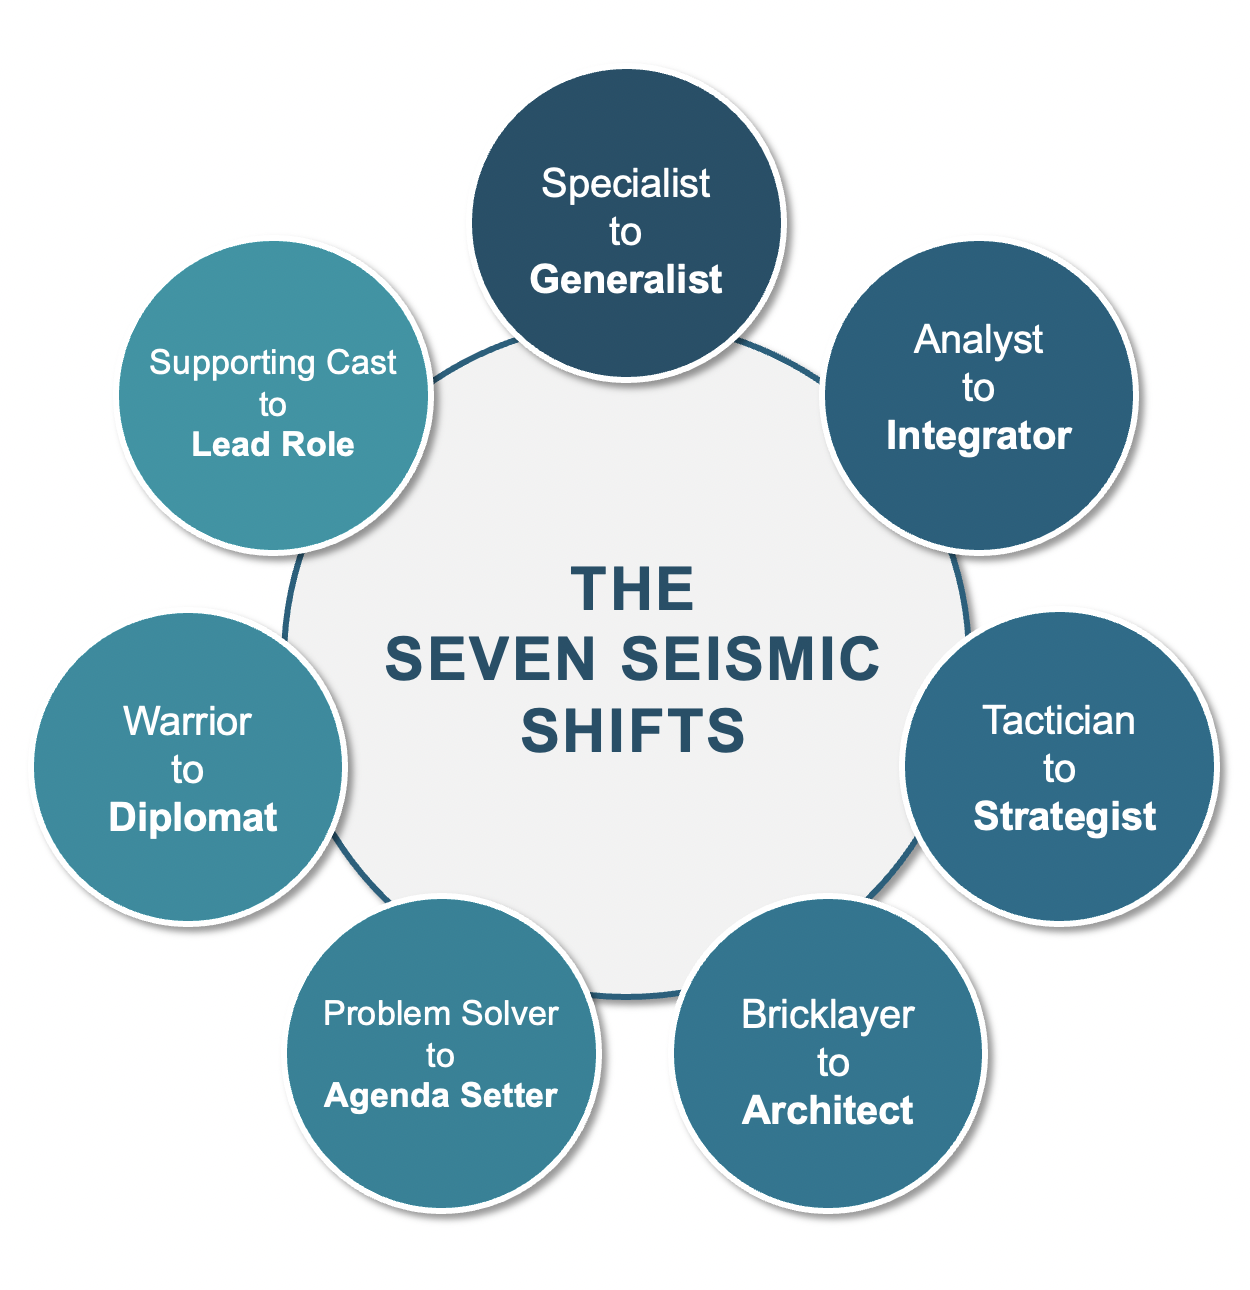 The Seven Seismic Shifts